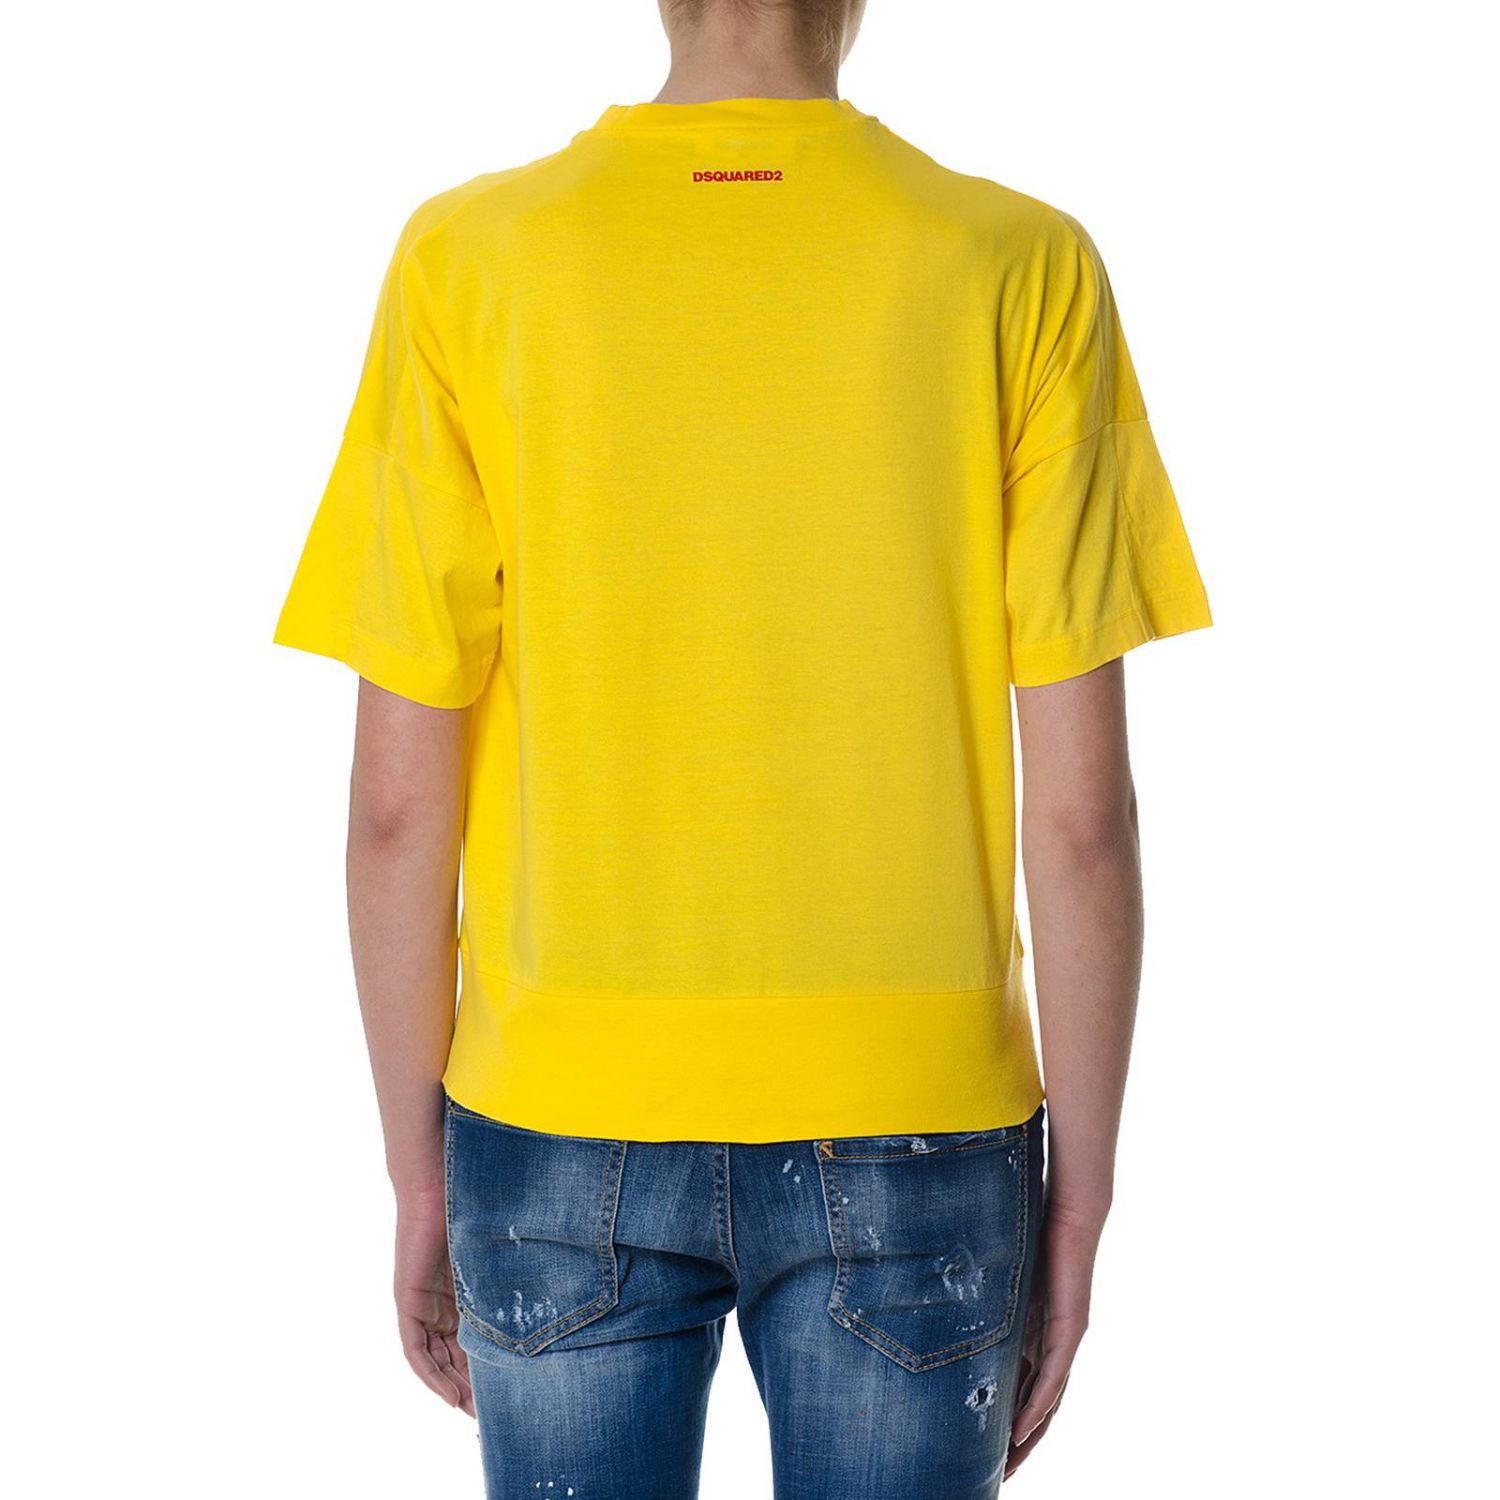 Dsquared2 Outlet: T-shirt women - Yellow | T-Shirt Dsquared2 S75GC0920 ...